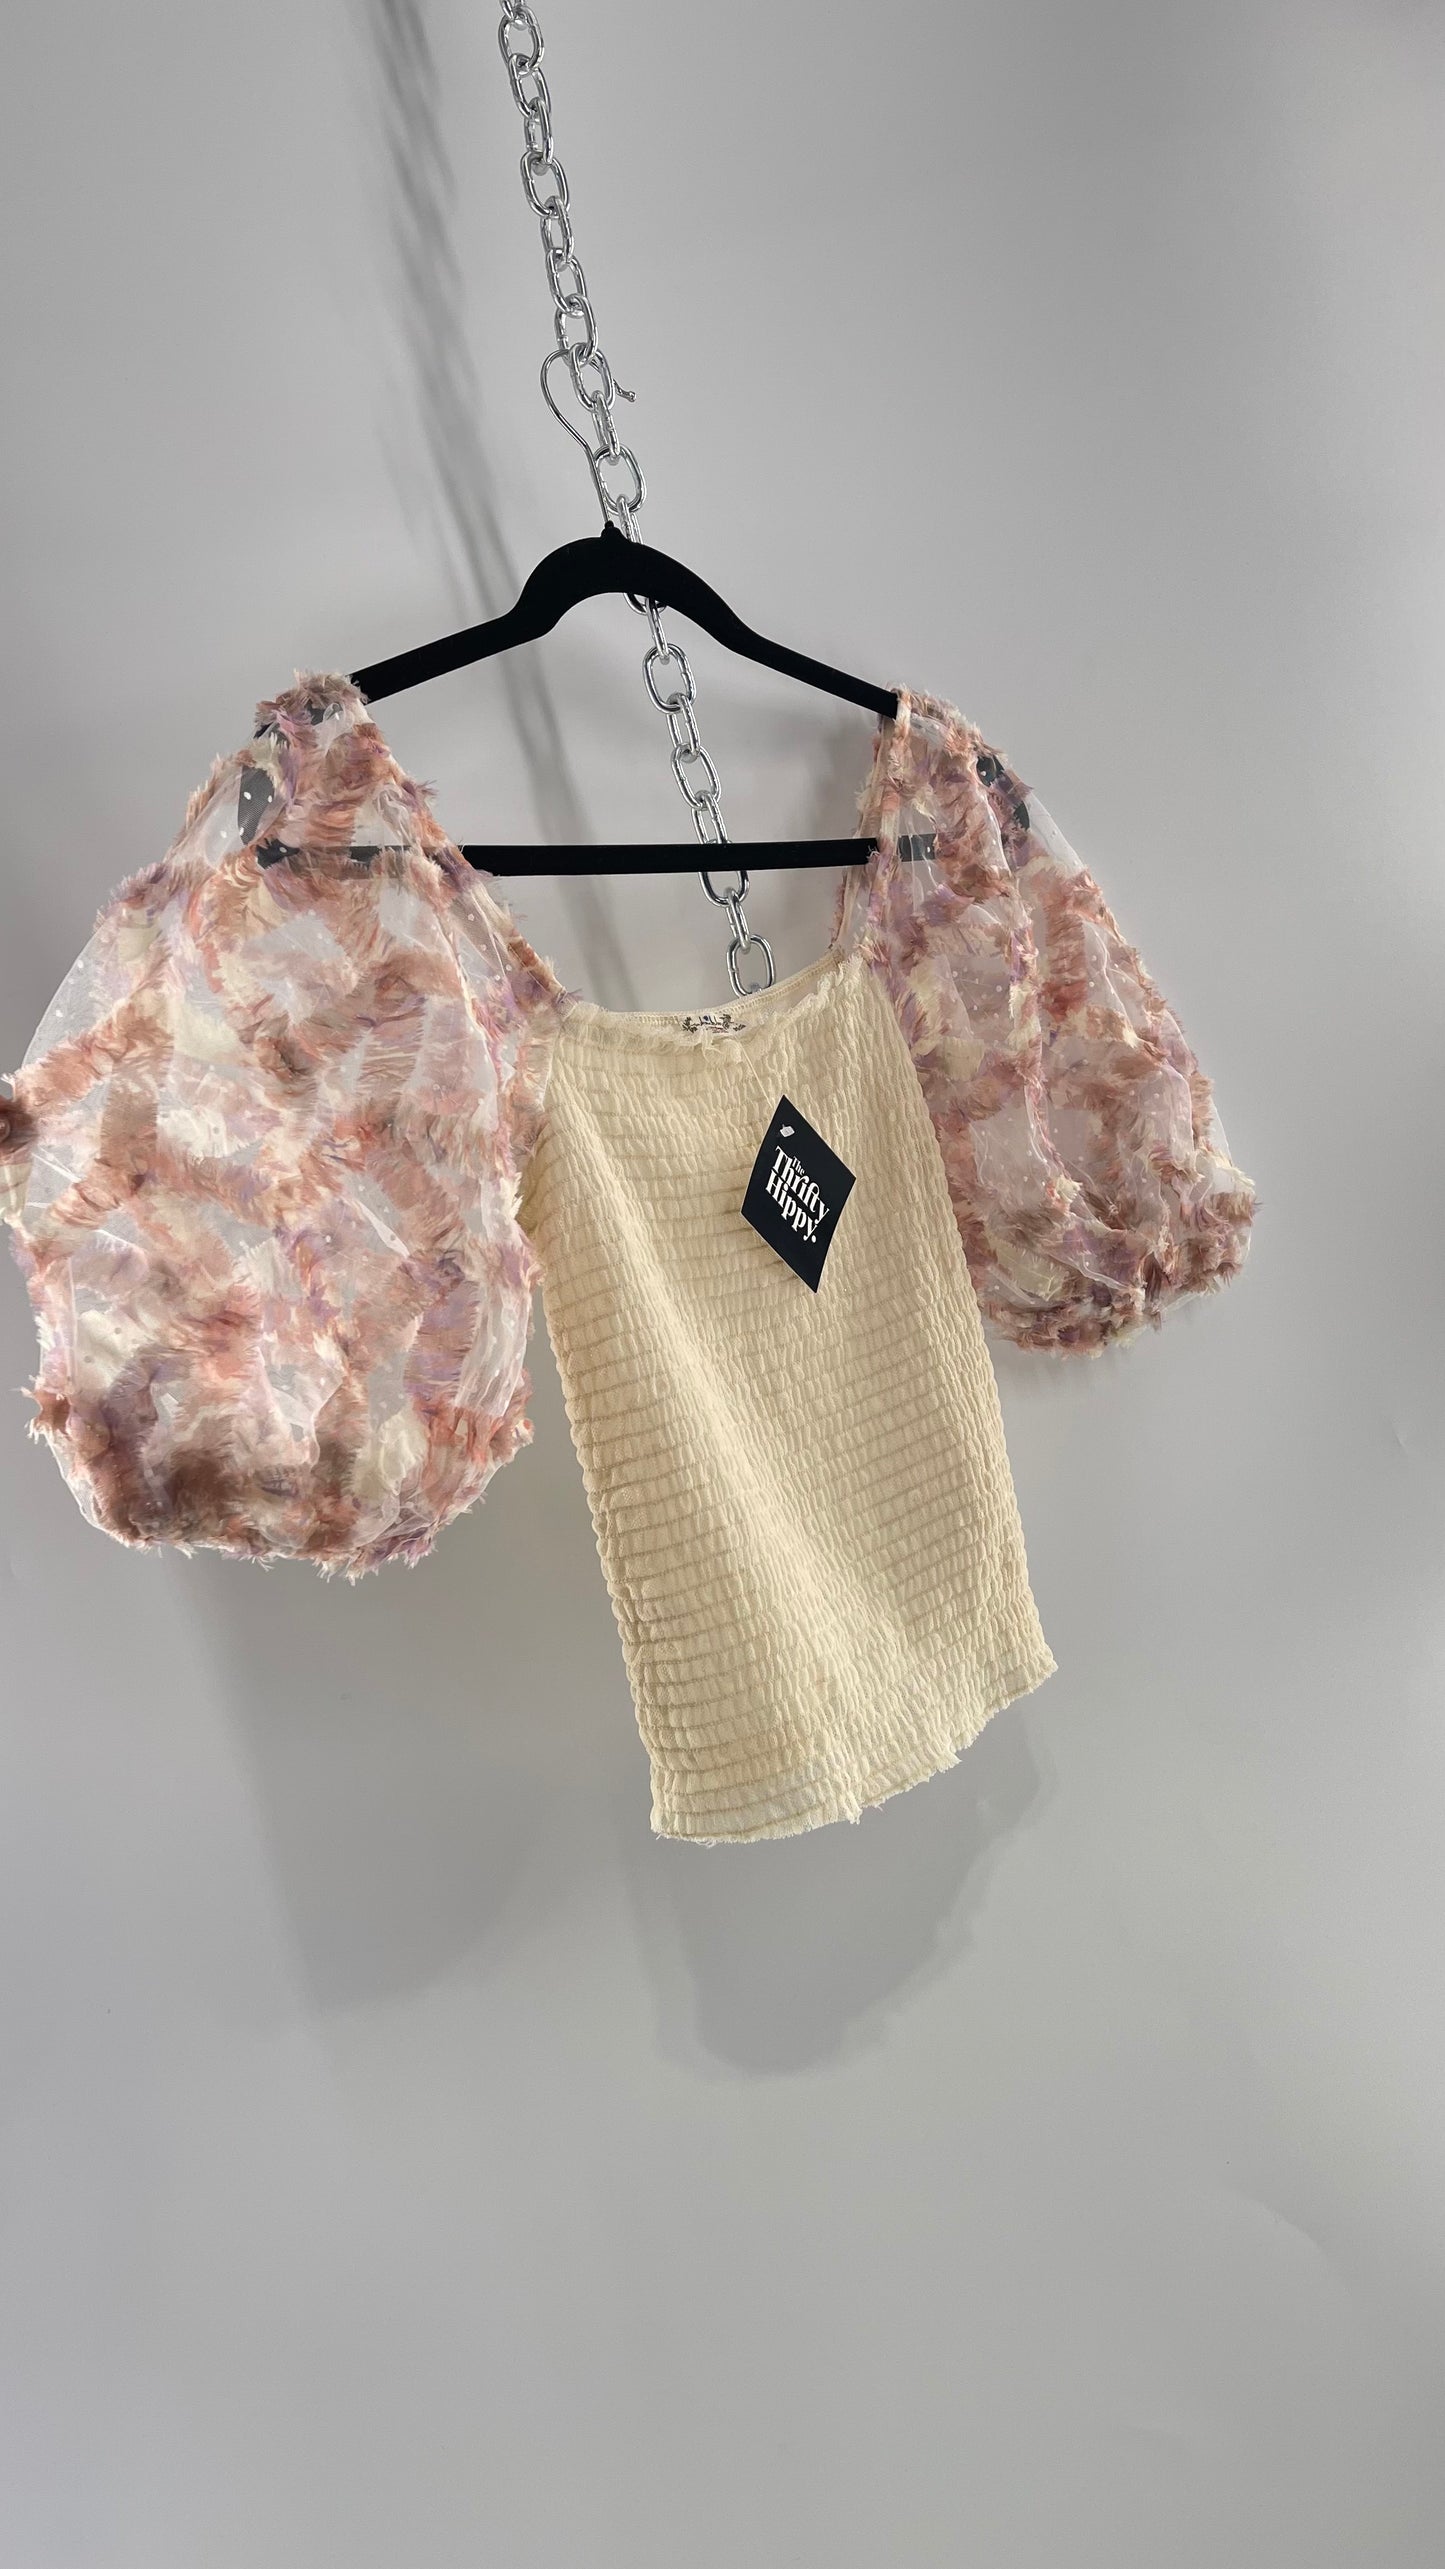 Free People Flower Girl Delicate Romantic Puff Sleeve Top with Smocked Mesh Body (Small)